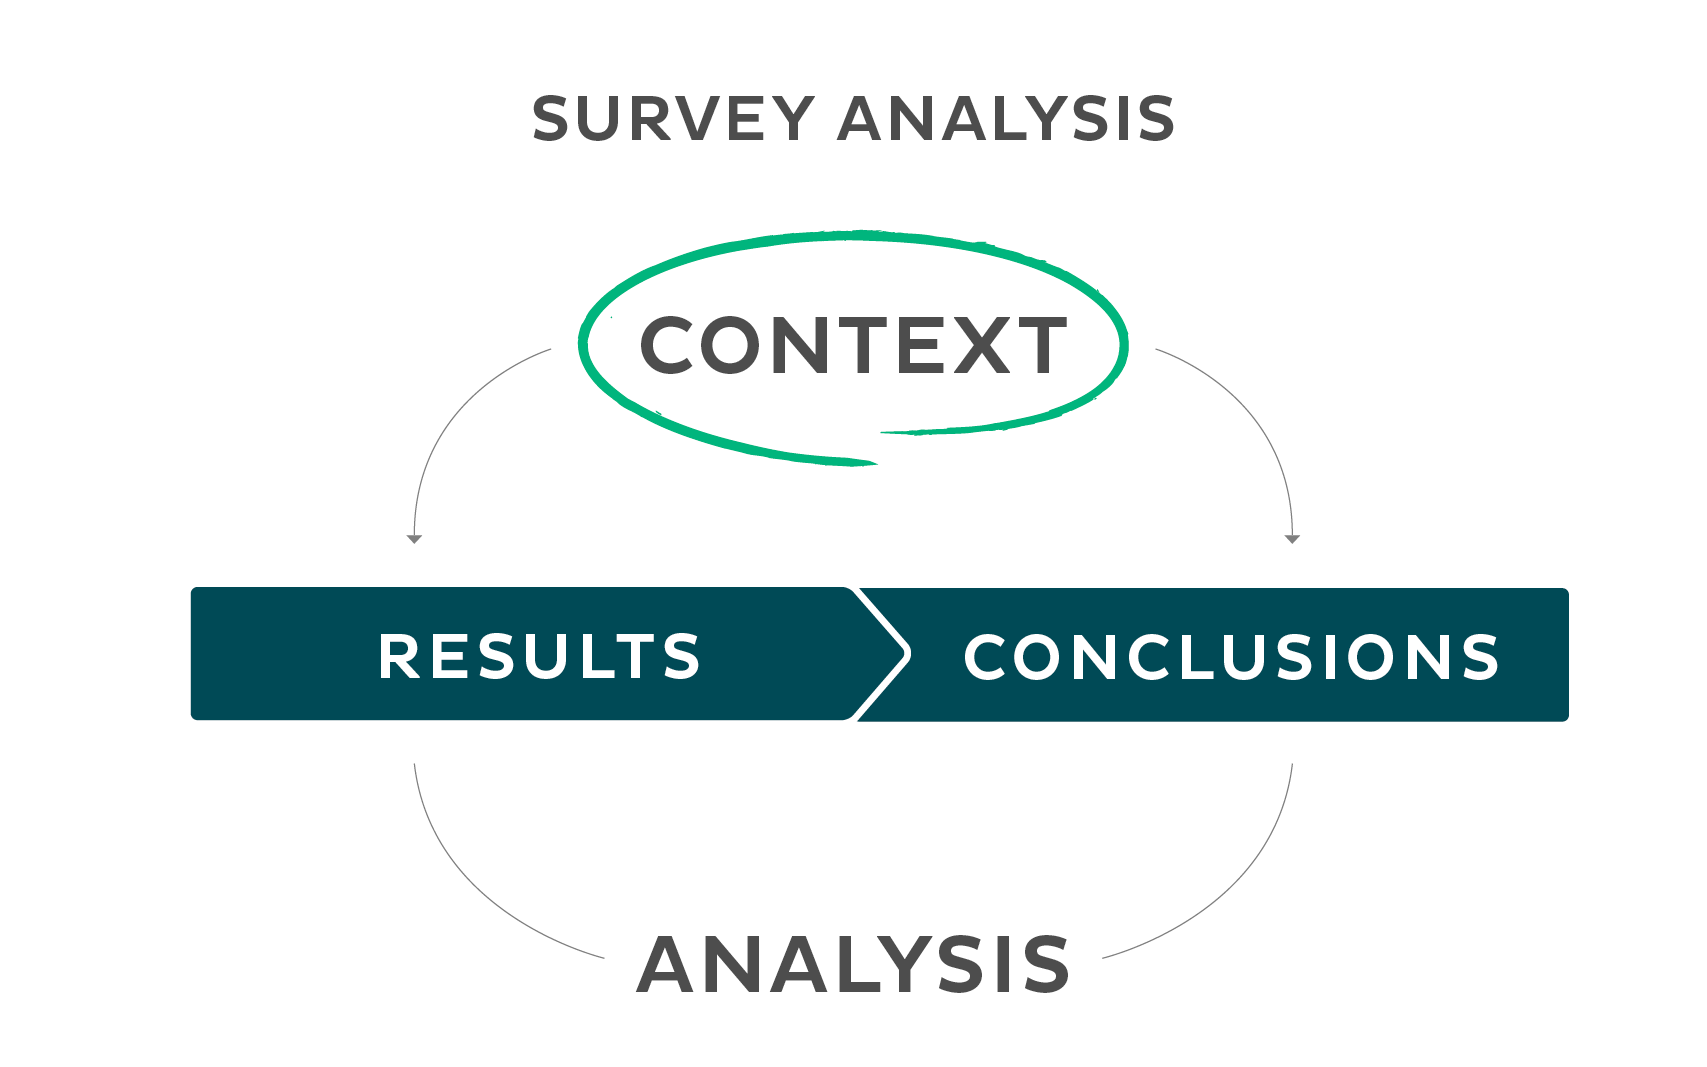 Survey analysis - RESULTS, CONCLUSIONS